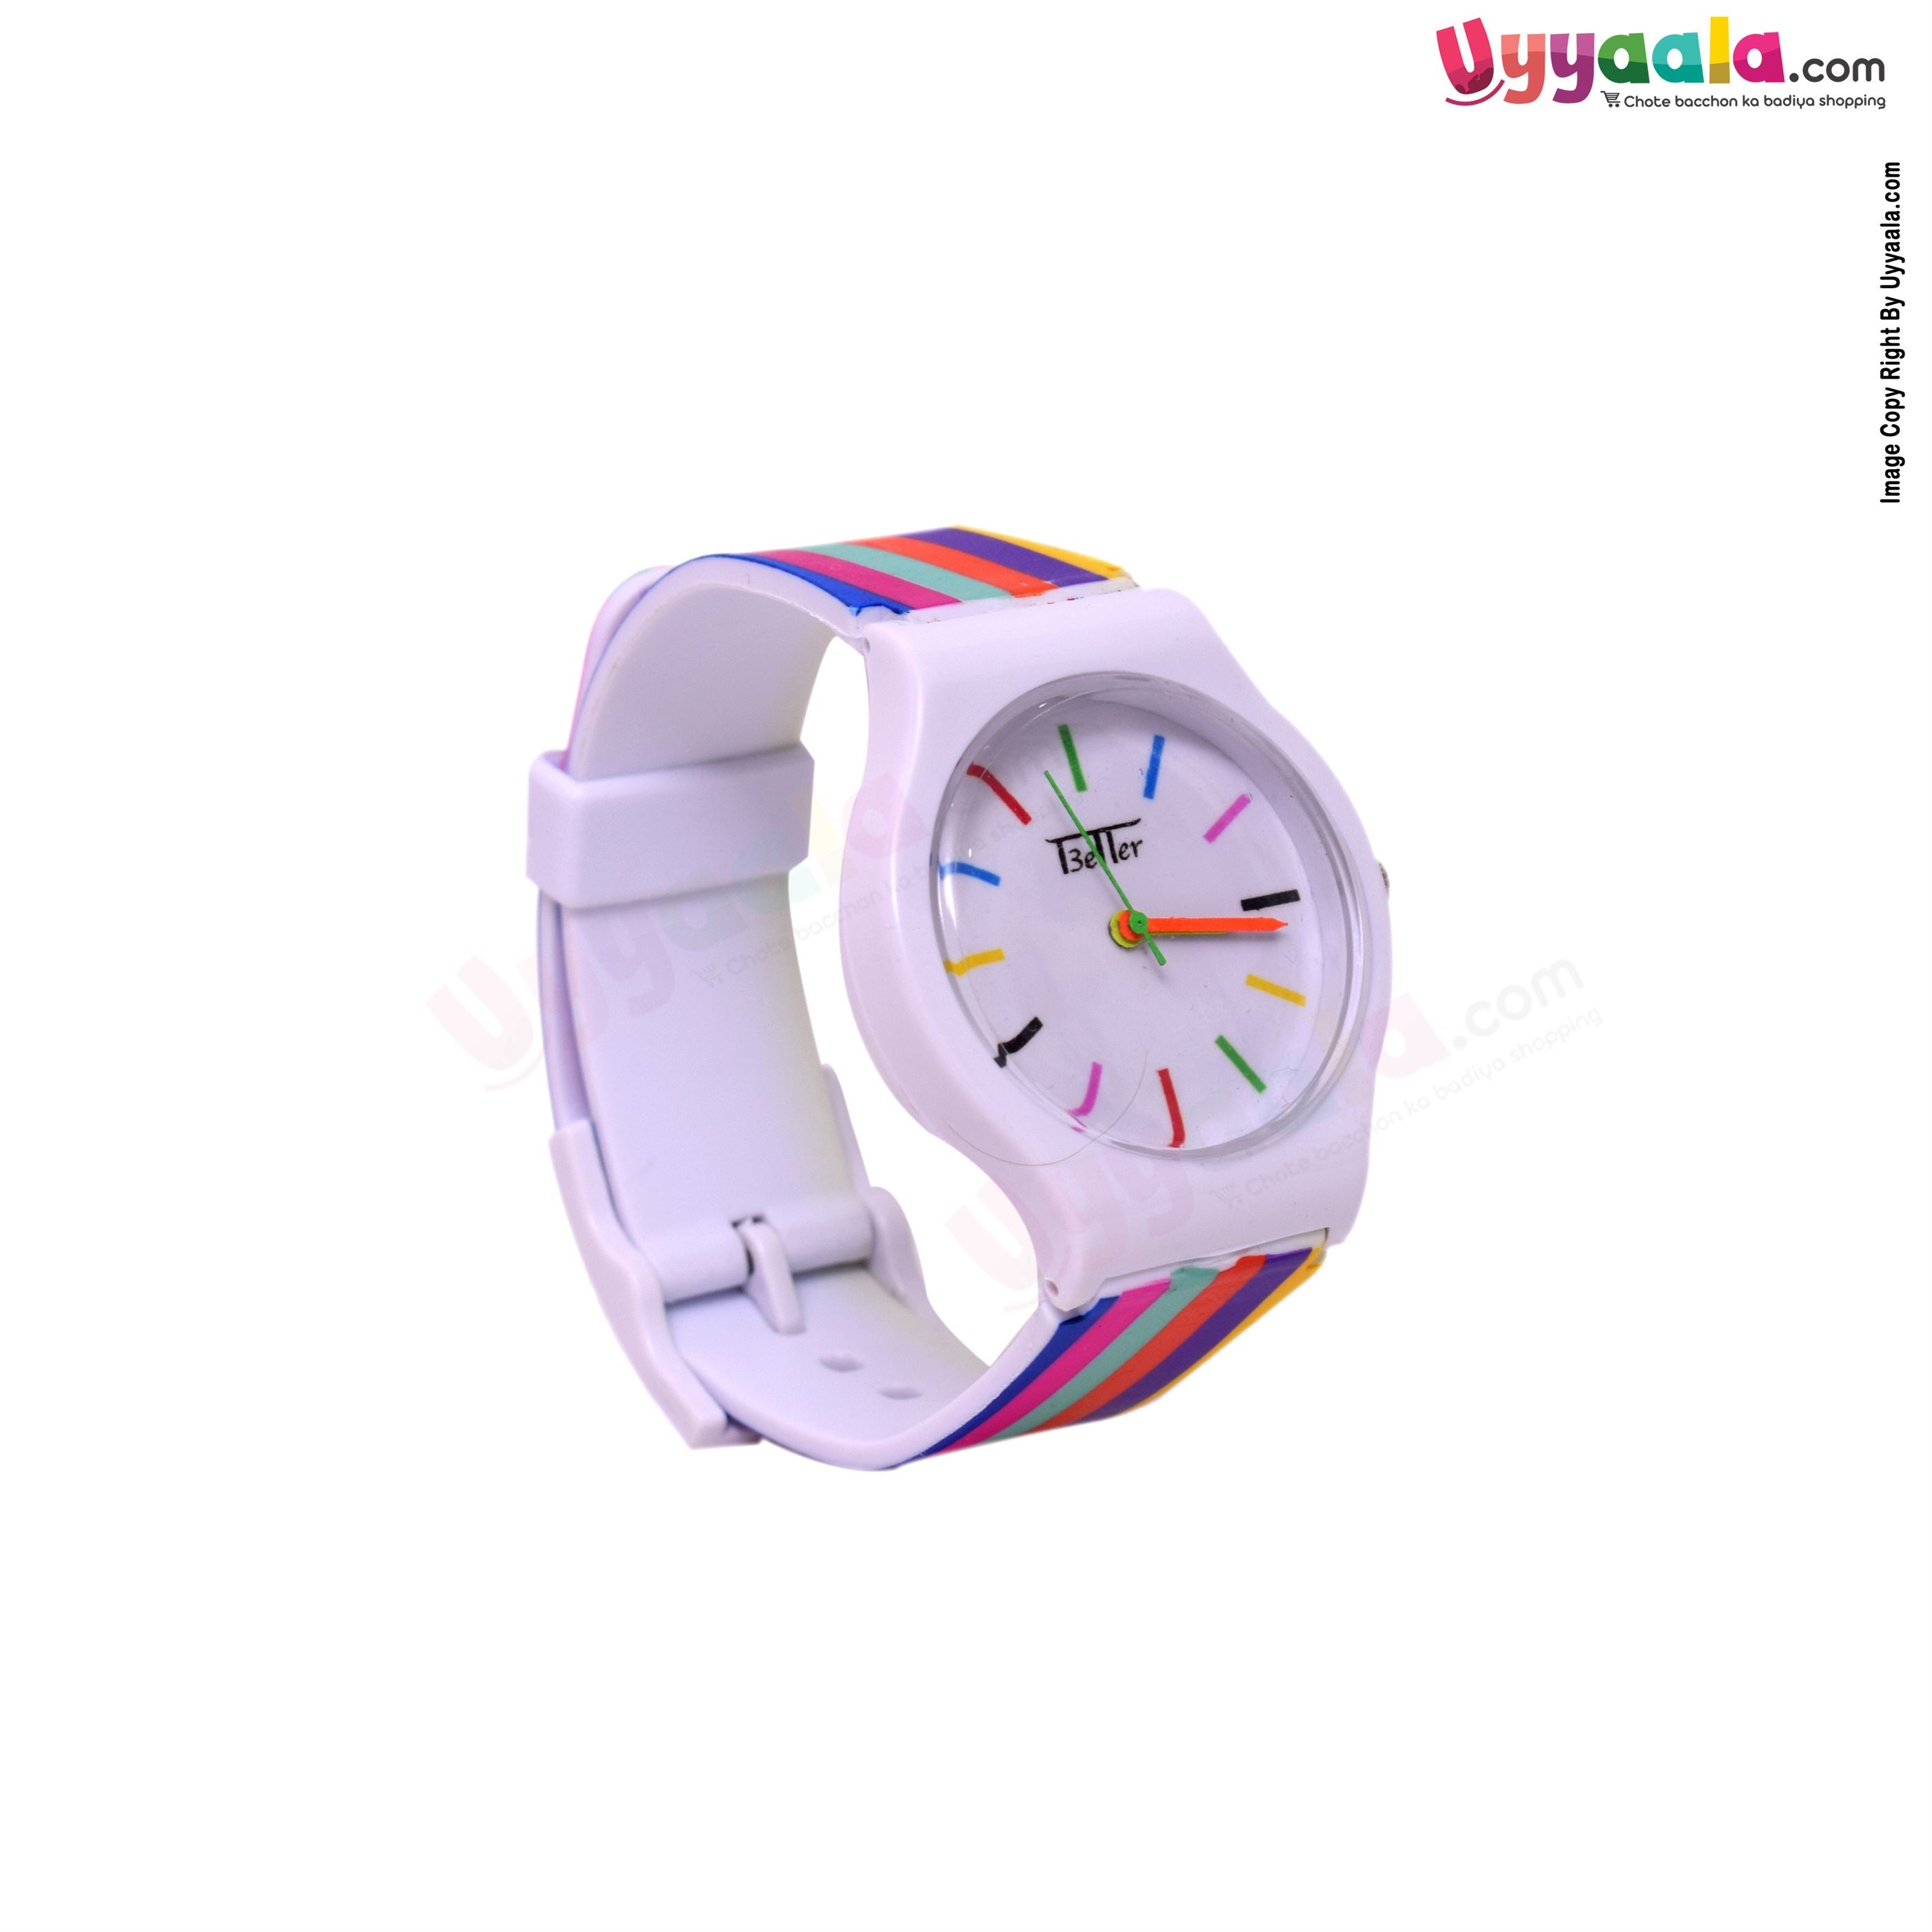 White analog wrist watch for kids - multicolor strap